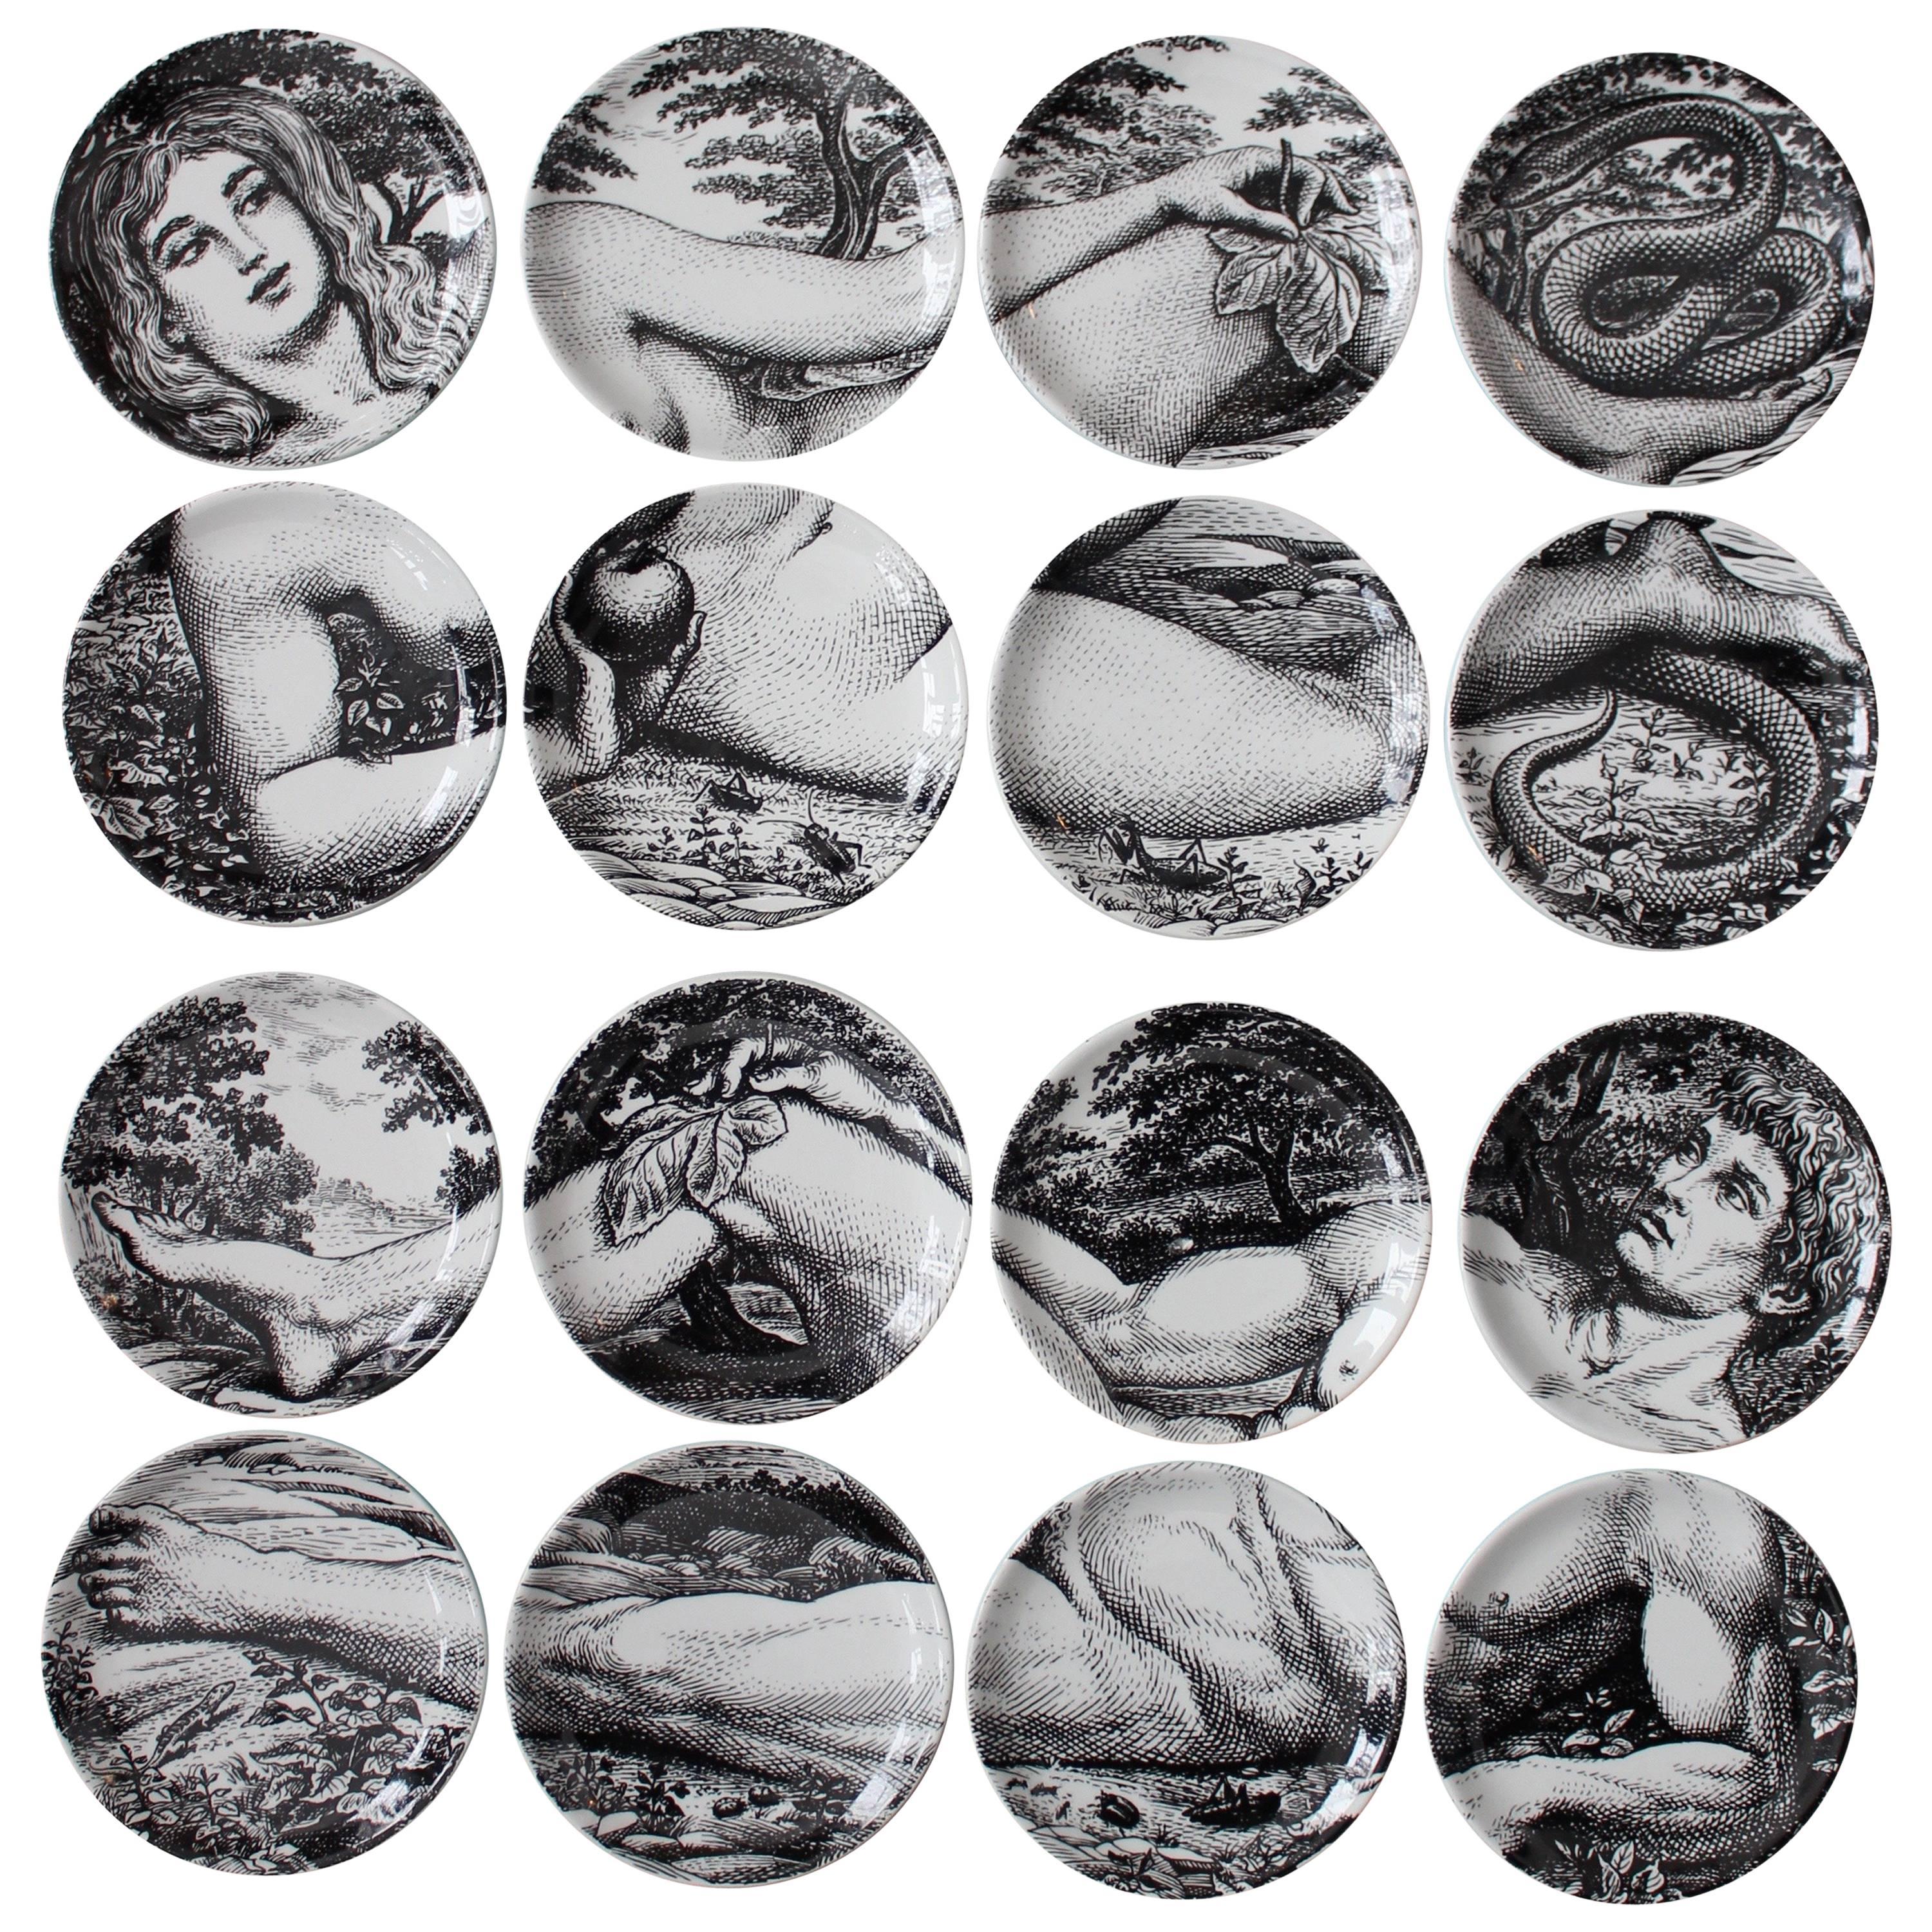 Two Complete Sets of Fornasetti Adam and Eve Coasters